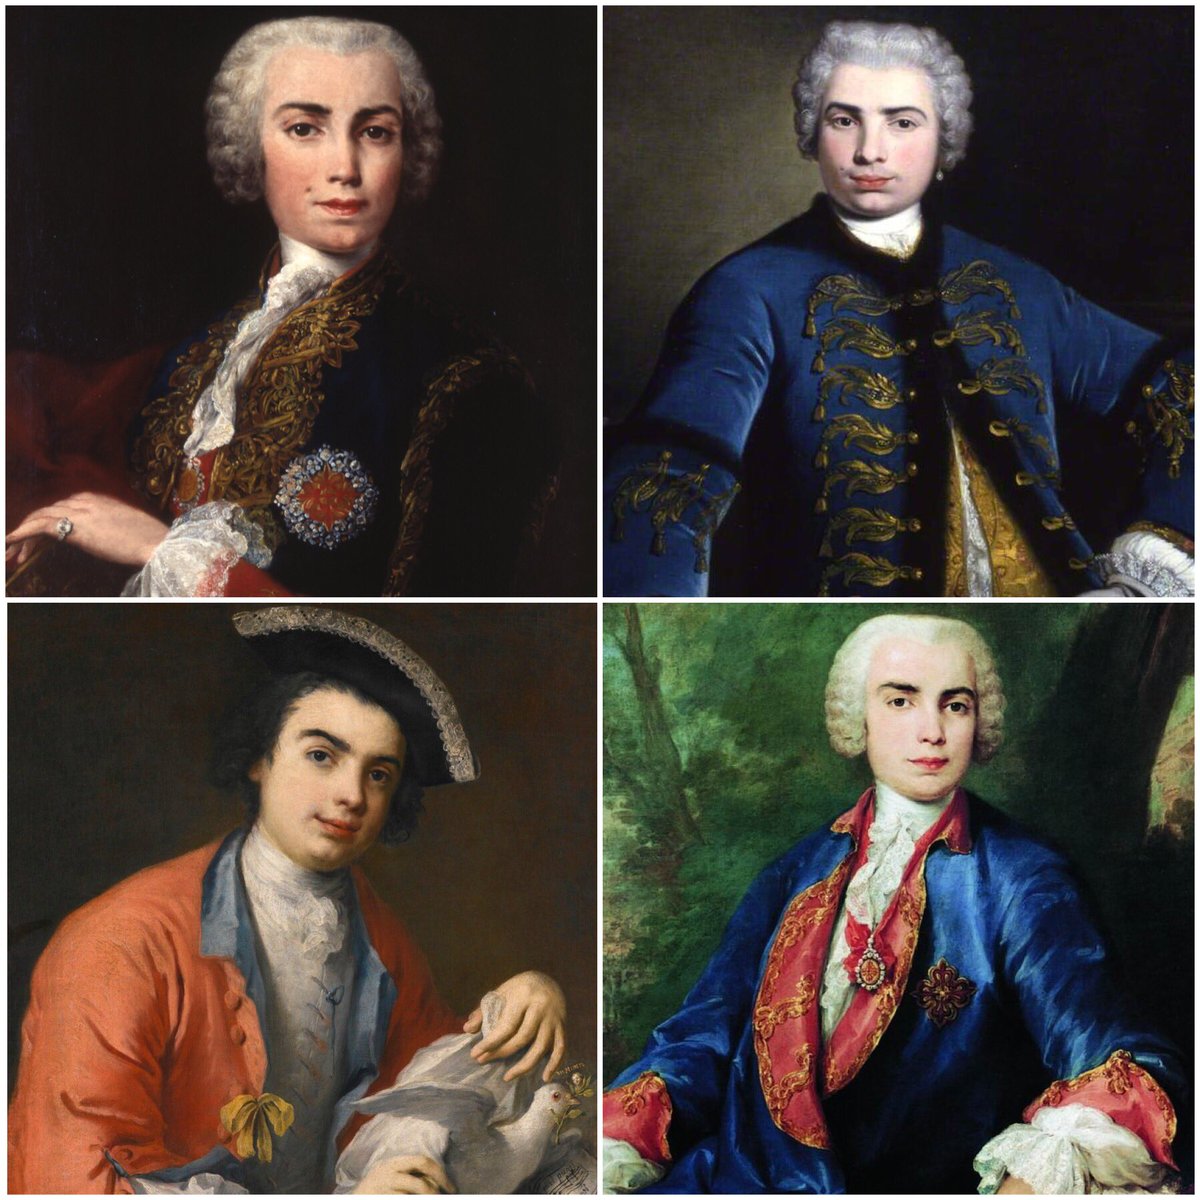 Come & uncover the many #facets of #Farinelli at our 4.30pm #concert tomorrow – feat. @IanPeterB, #PiotrJordan, @Mariamezzo1991 & @cenkkaraferya – as we paint a profile of the #castrato & his times from the depths of the @BrunelMuseum’s #RotherhitheShaft! buytickets.at/lesbougiesbaro…